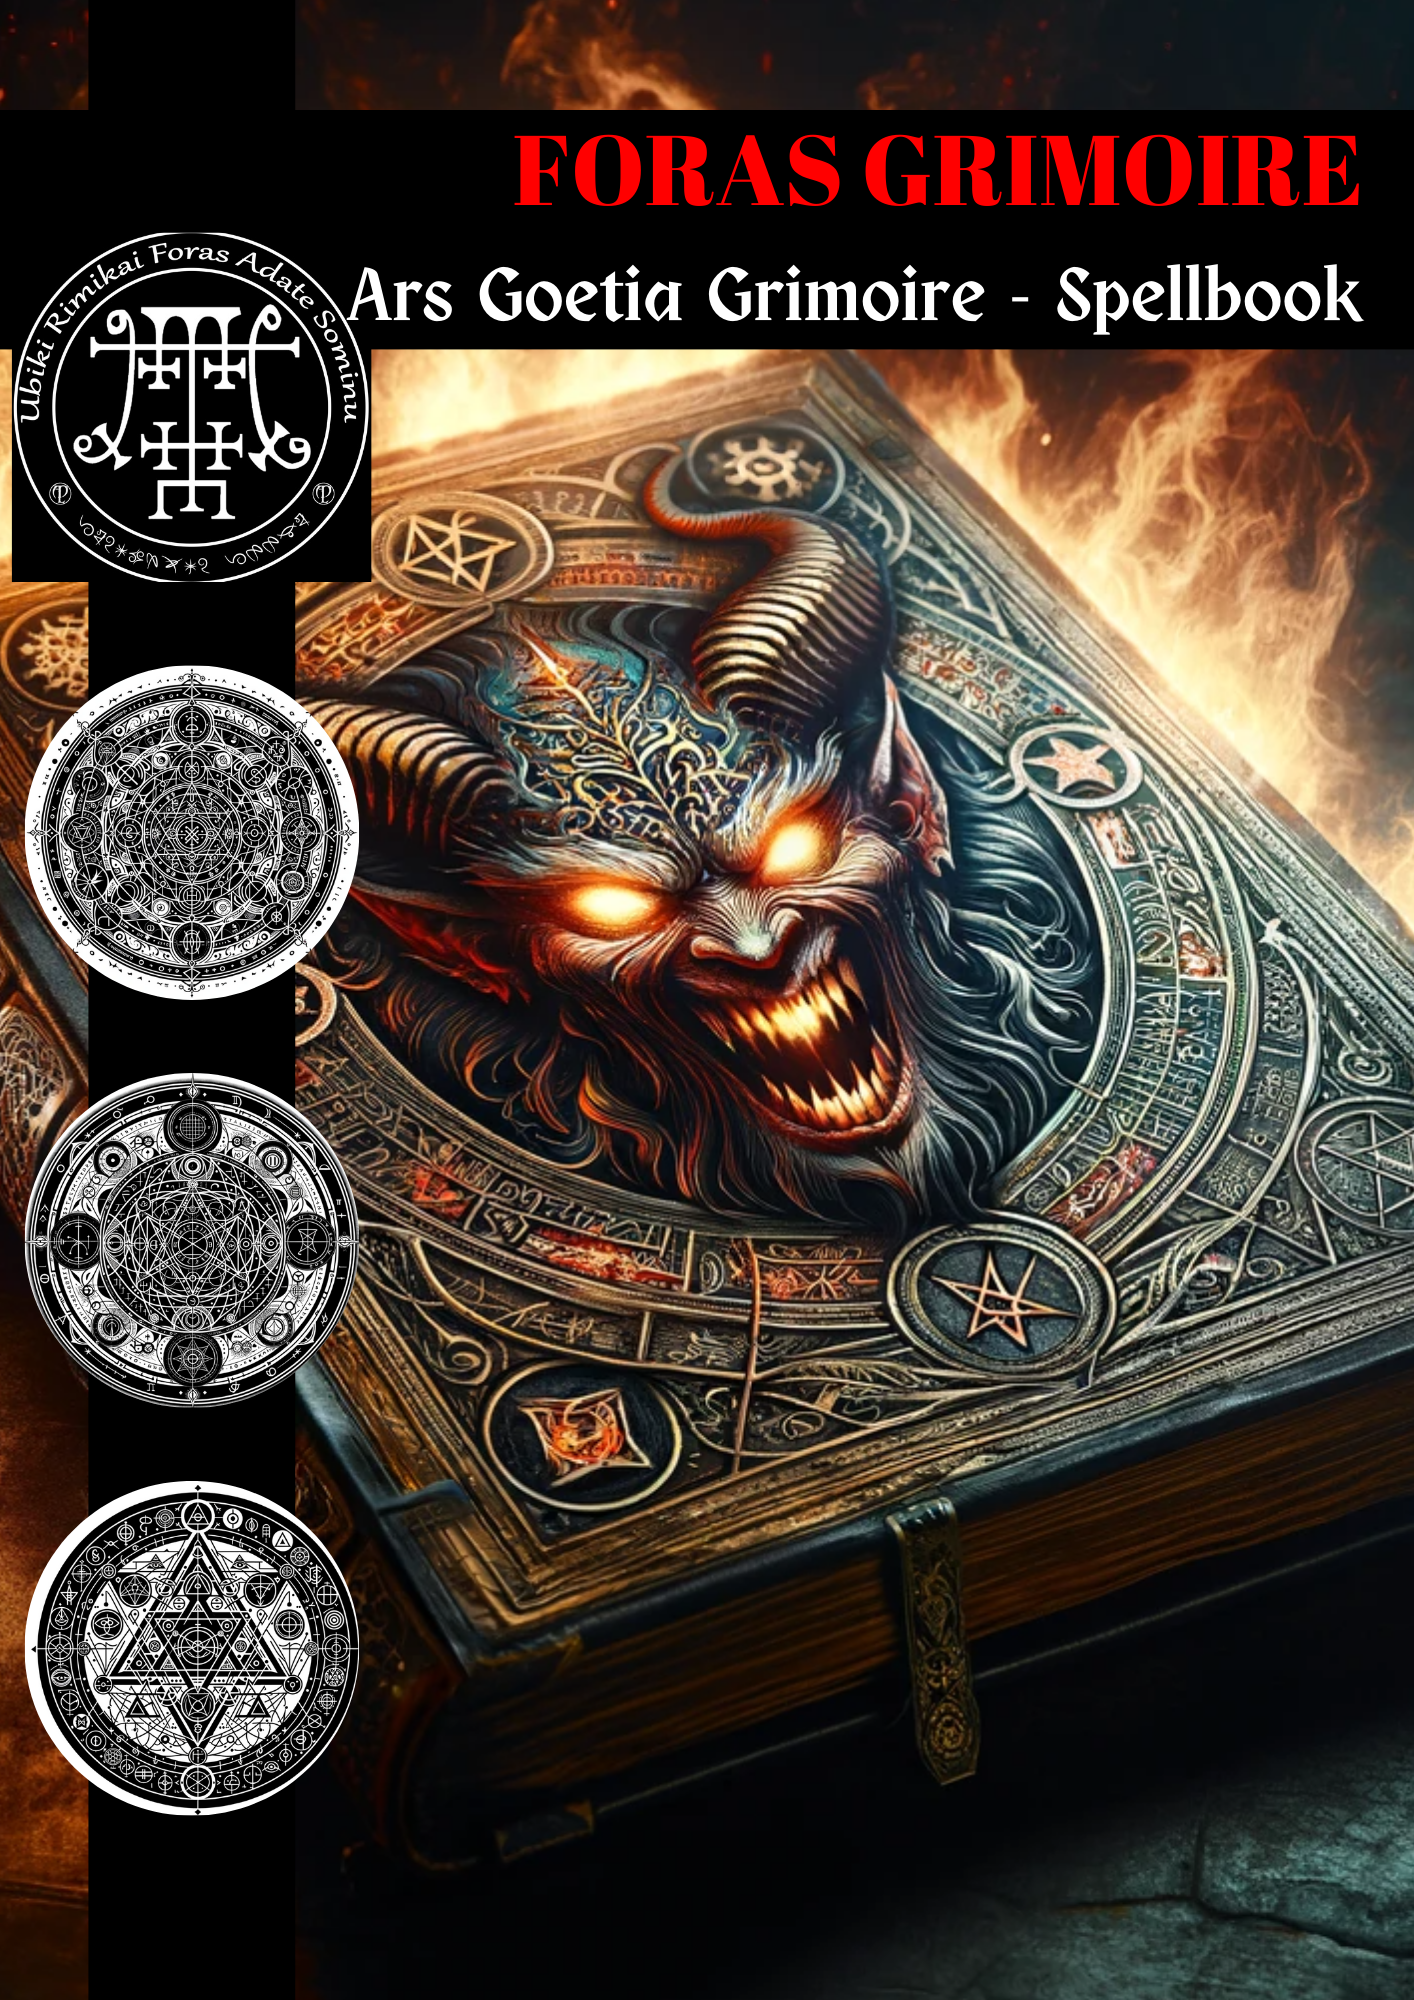 Grimoire of Foras Spells & Rituals for Magical Practise and Resolve Business Problems - Abraxas Amulets ® Magic ♾️ Talismans ♾️ Initiations